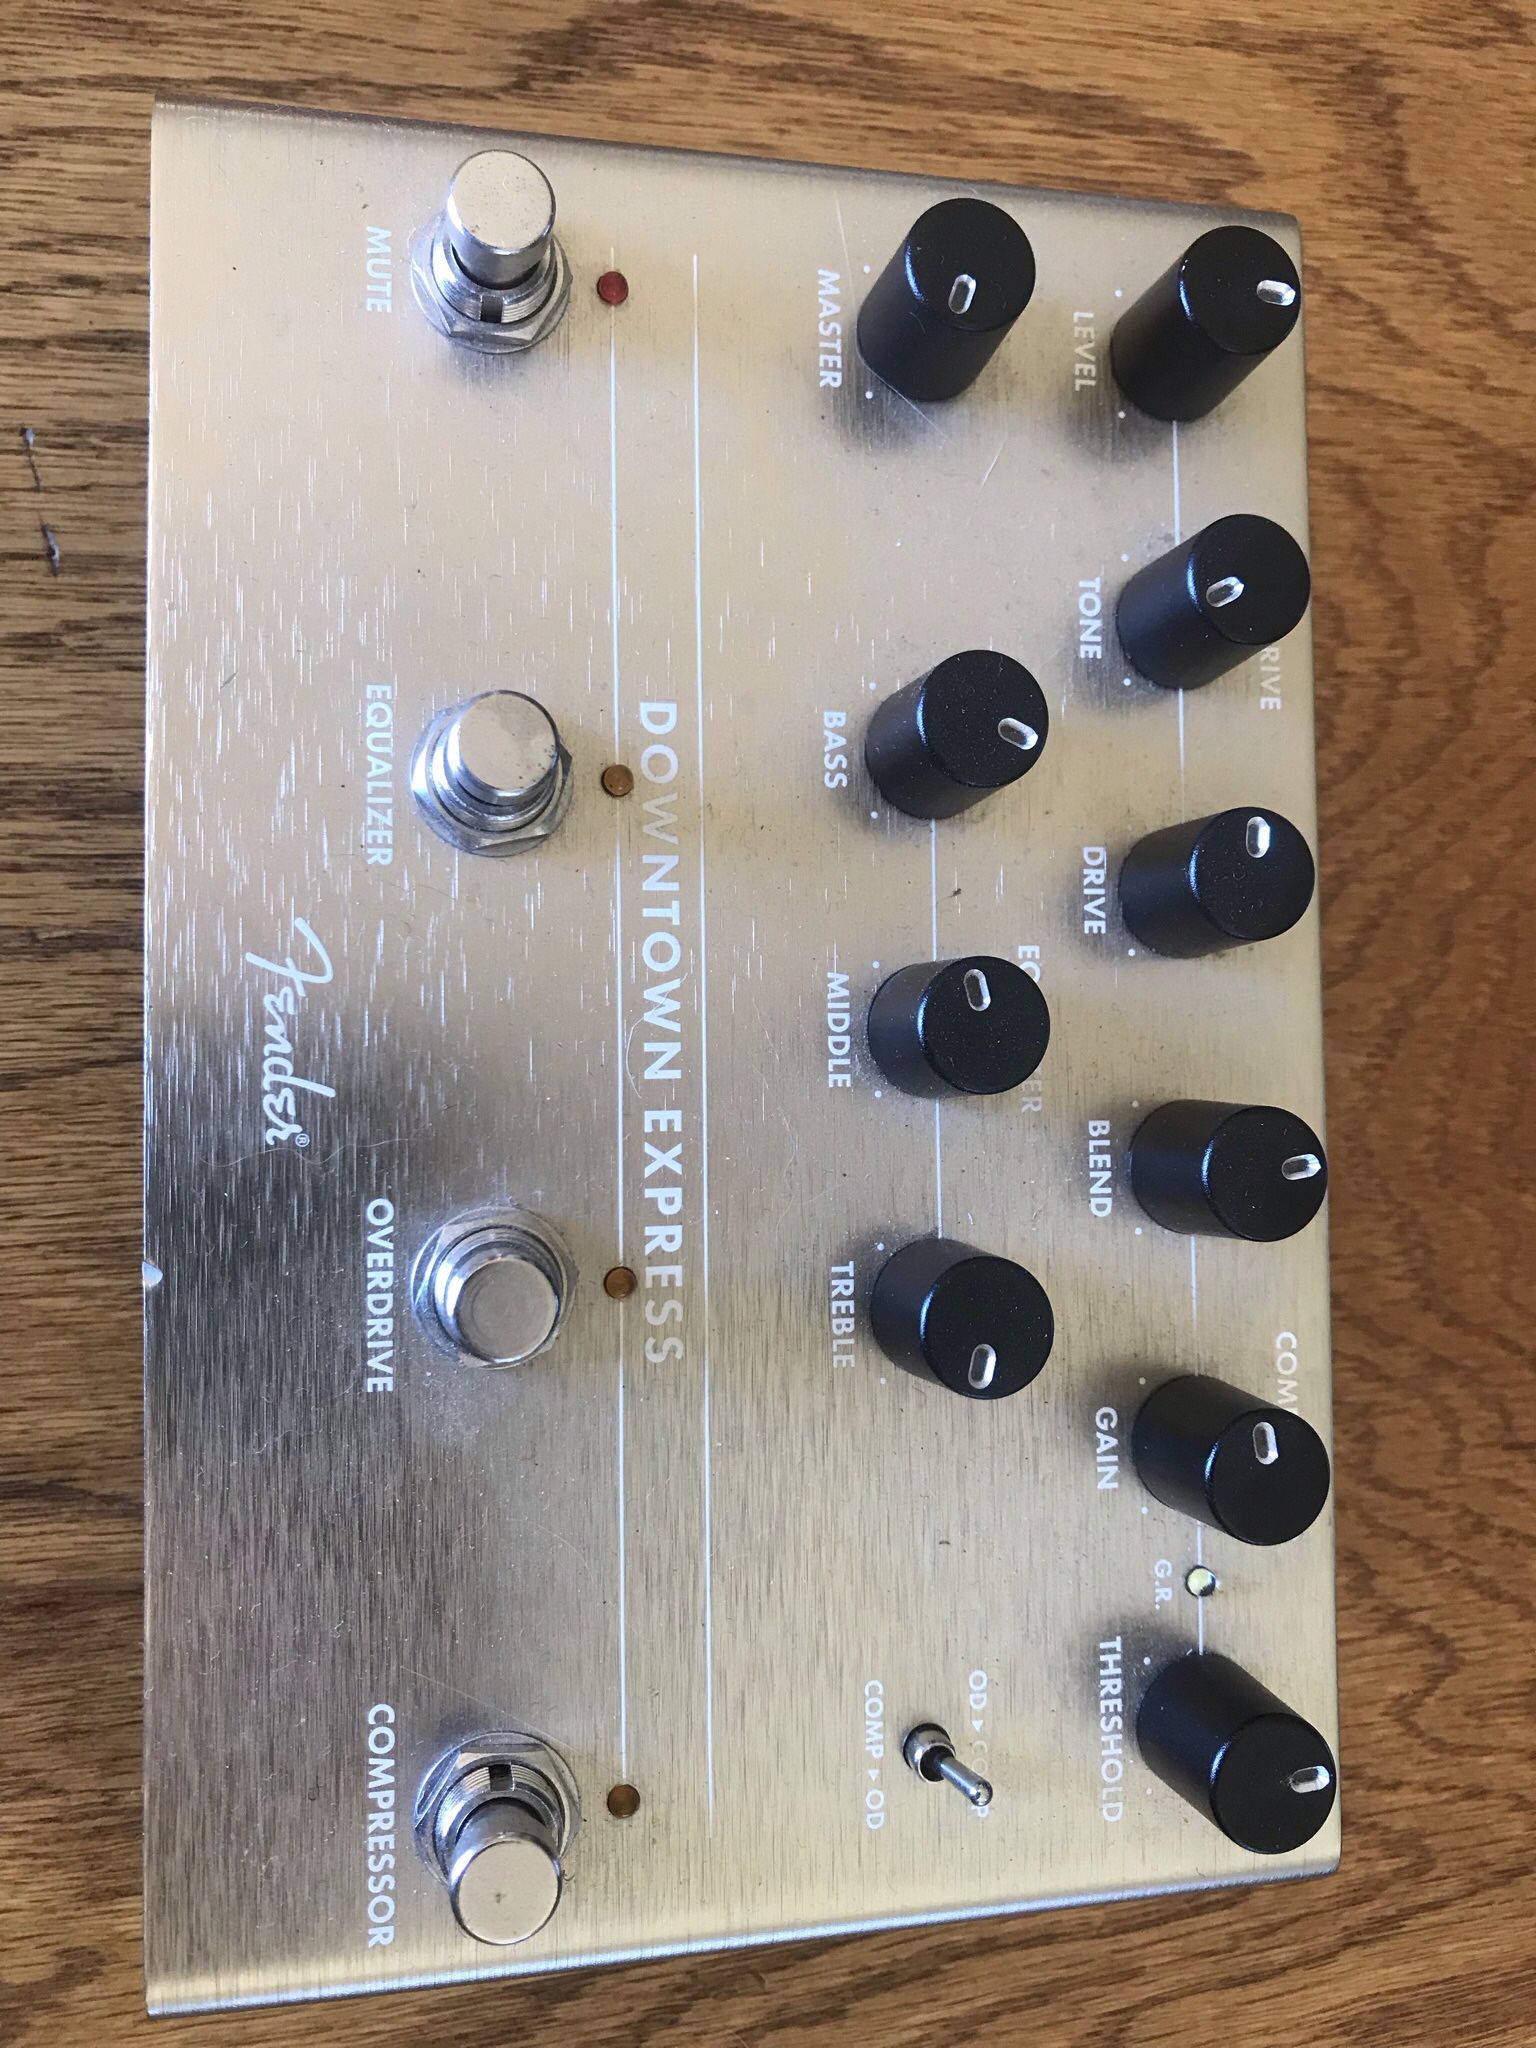 Fender Downtown Express Bass Multi Effects for Sale in Yucca Valley, CA -  OfferUp